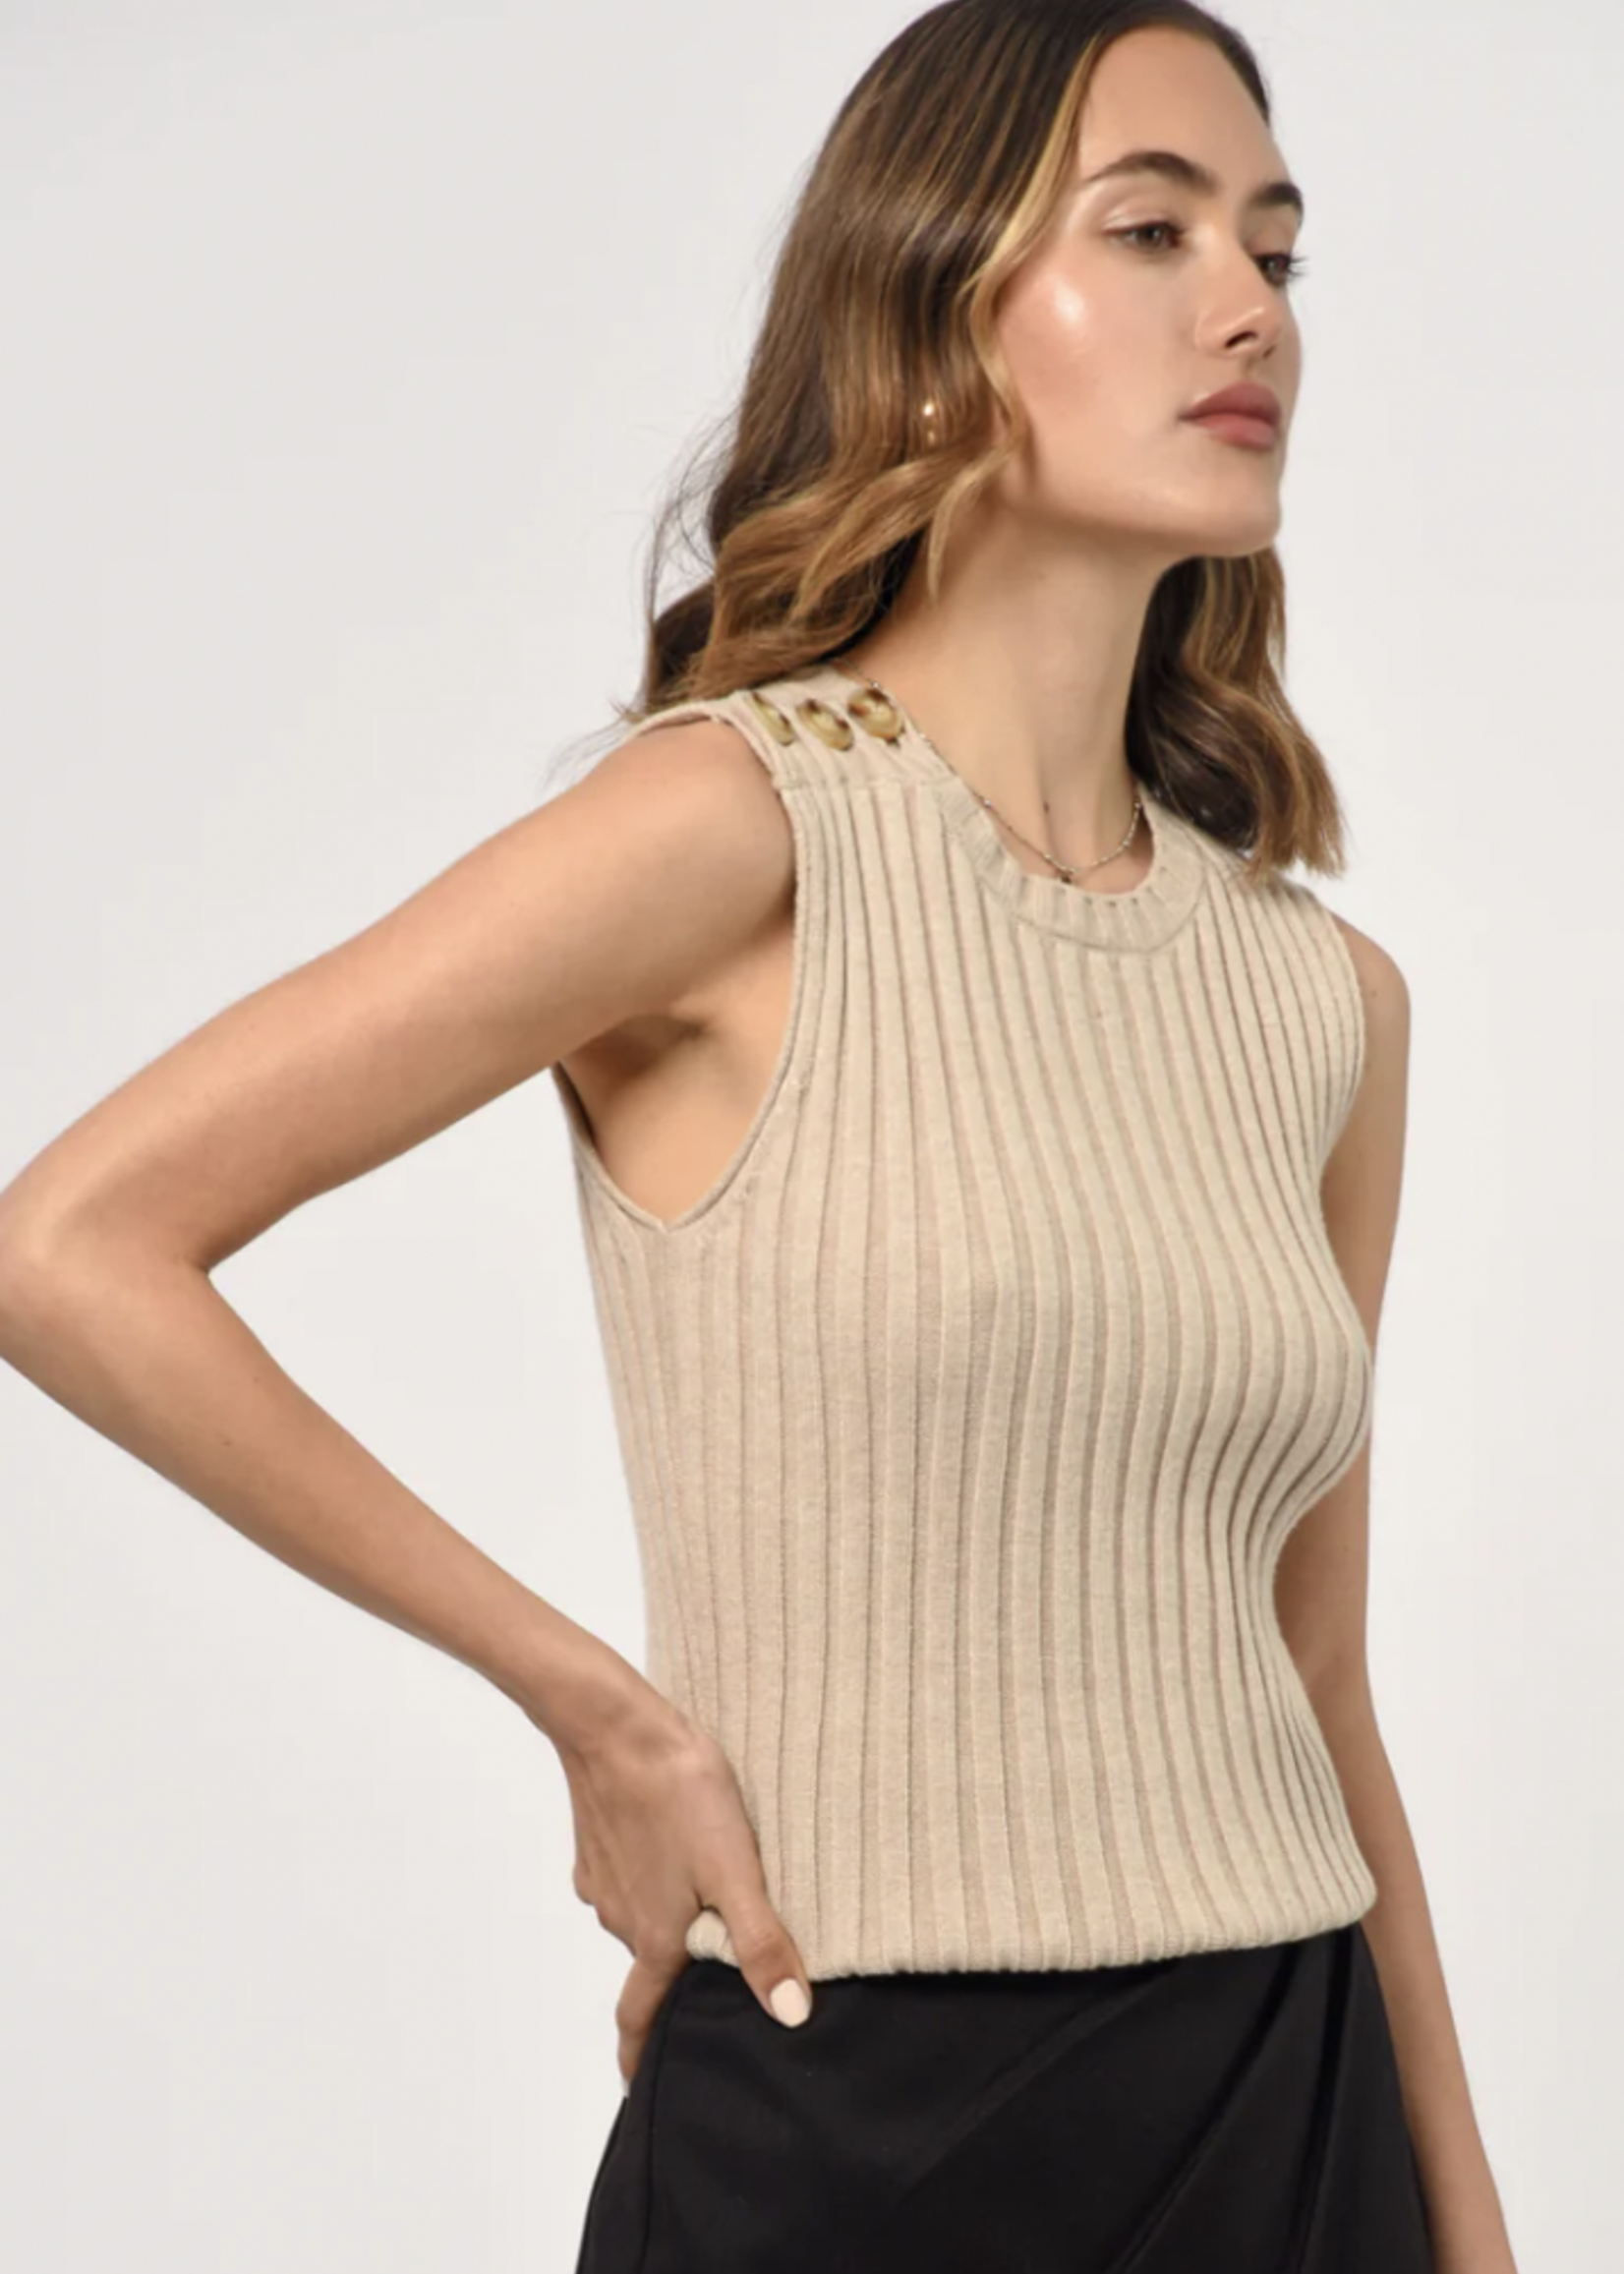 Elitaire Boutique Yale Knit Top in Oatmeal